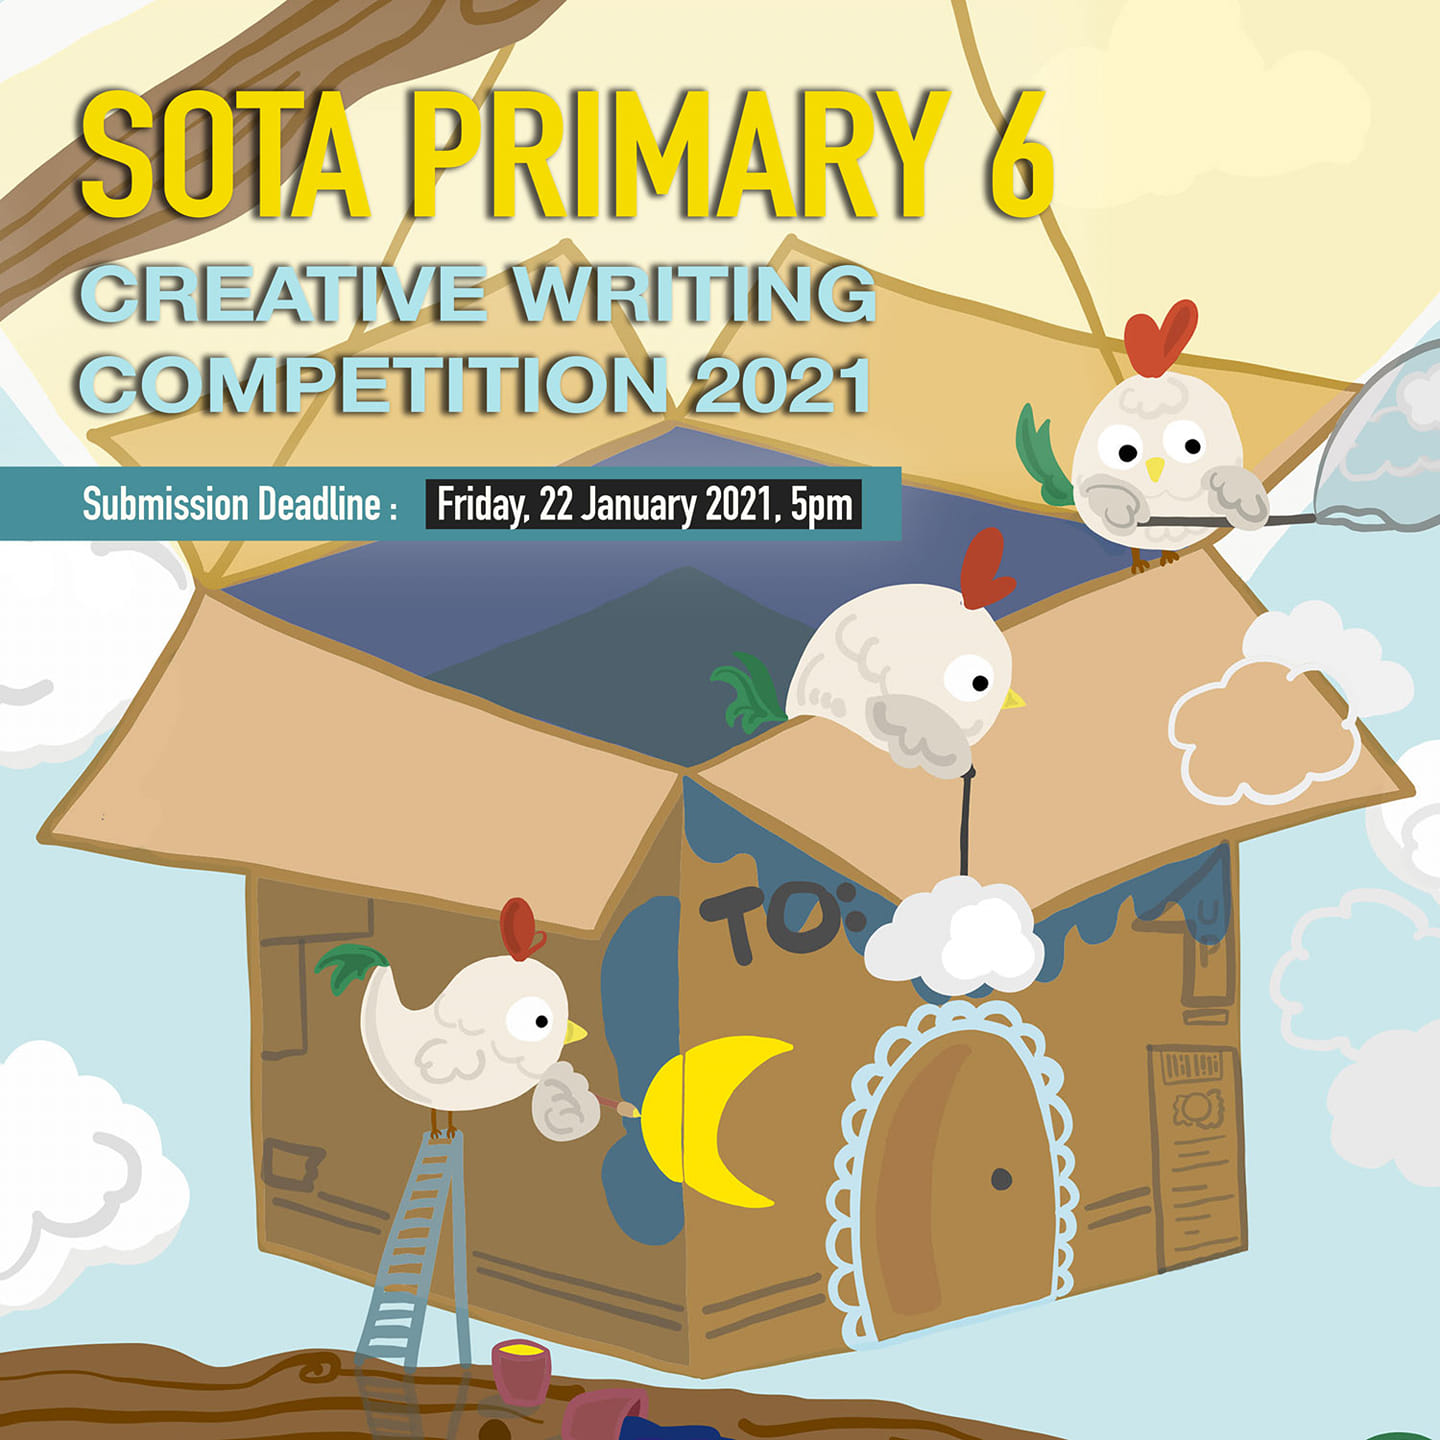 2021 SOTA Primary 6 Creative Writing Competition_FB-IG